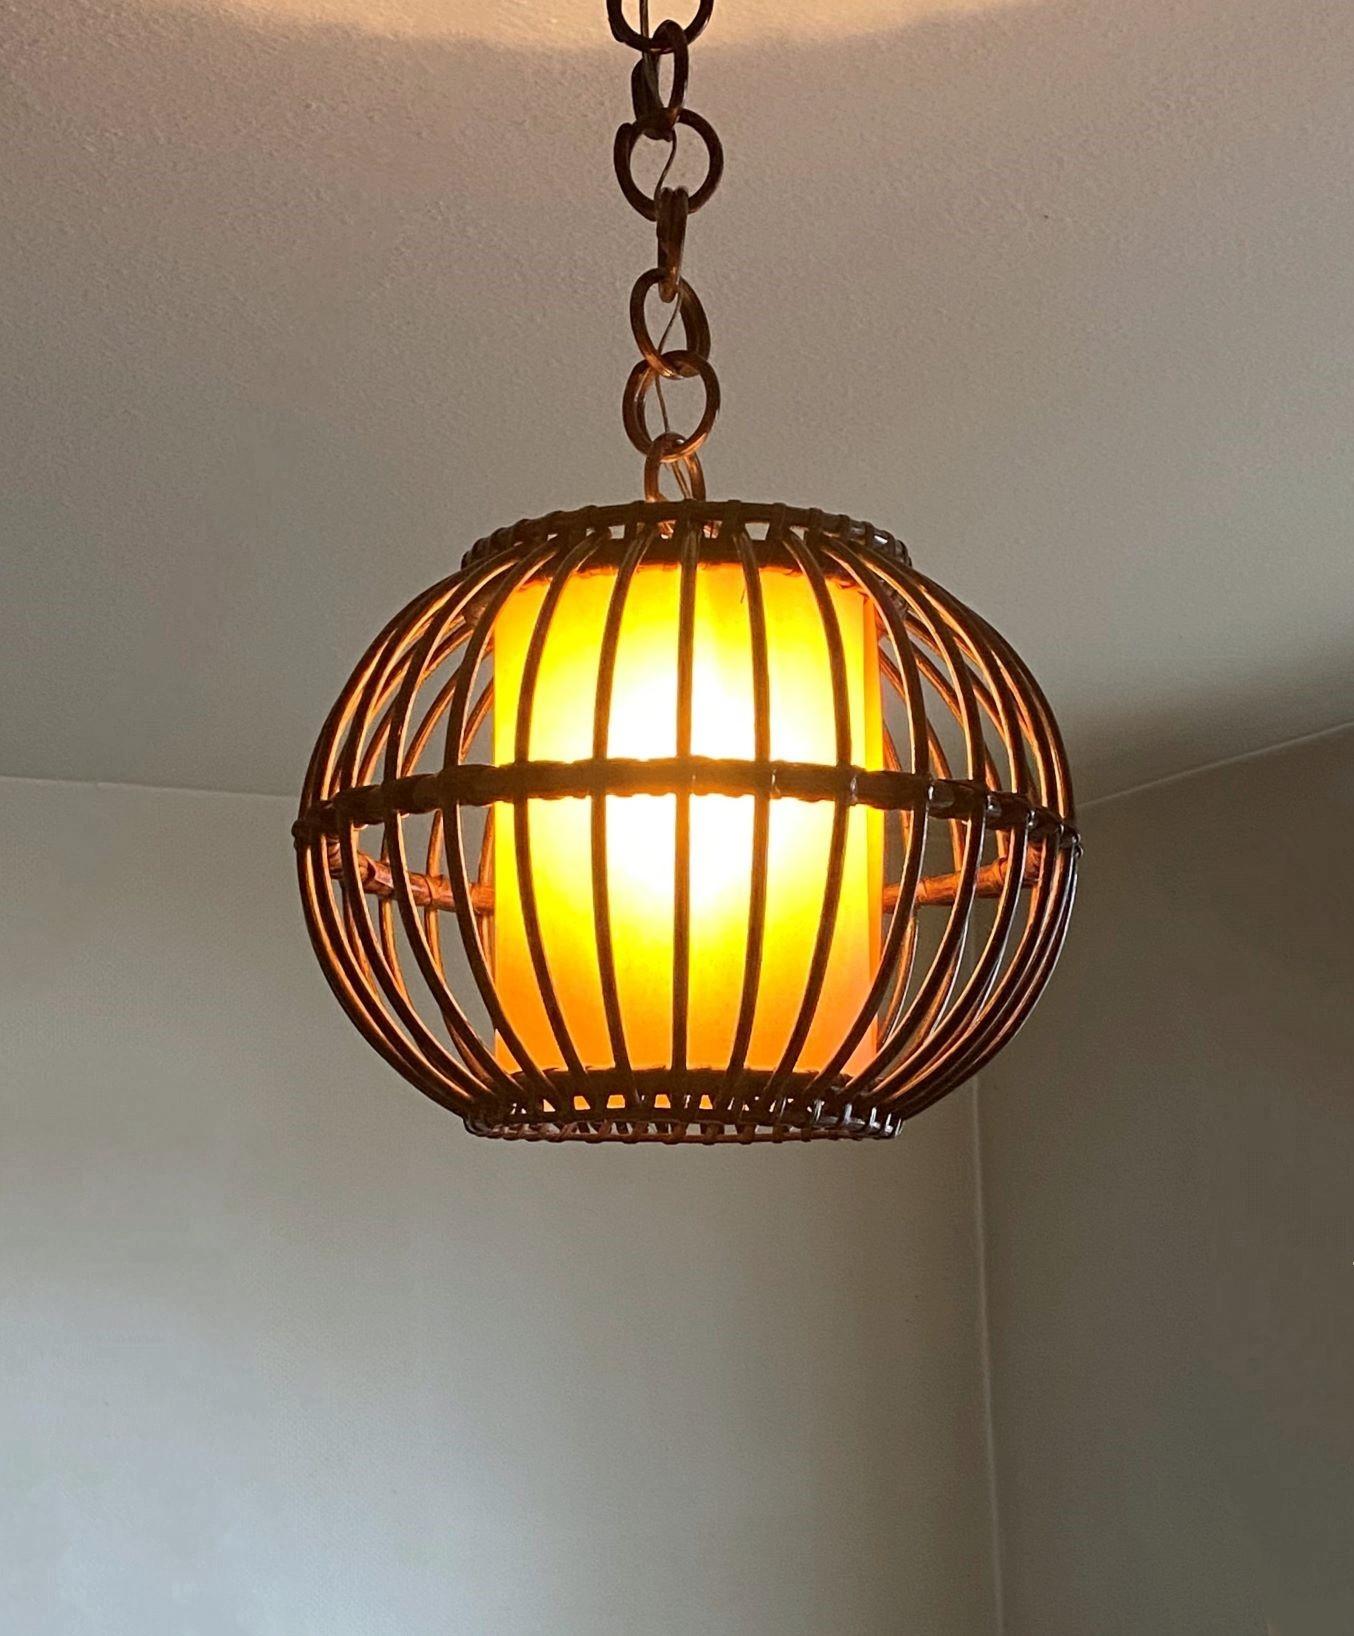 Louis Sognot Bamboo Rattan Pendant Lantern with Perchment Shade, France, 1950s For Sale 2